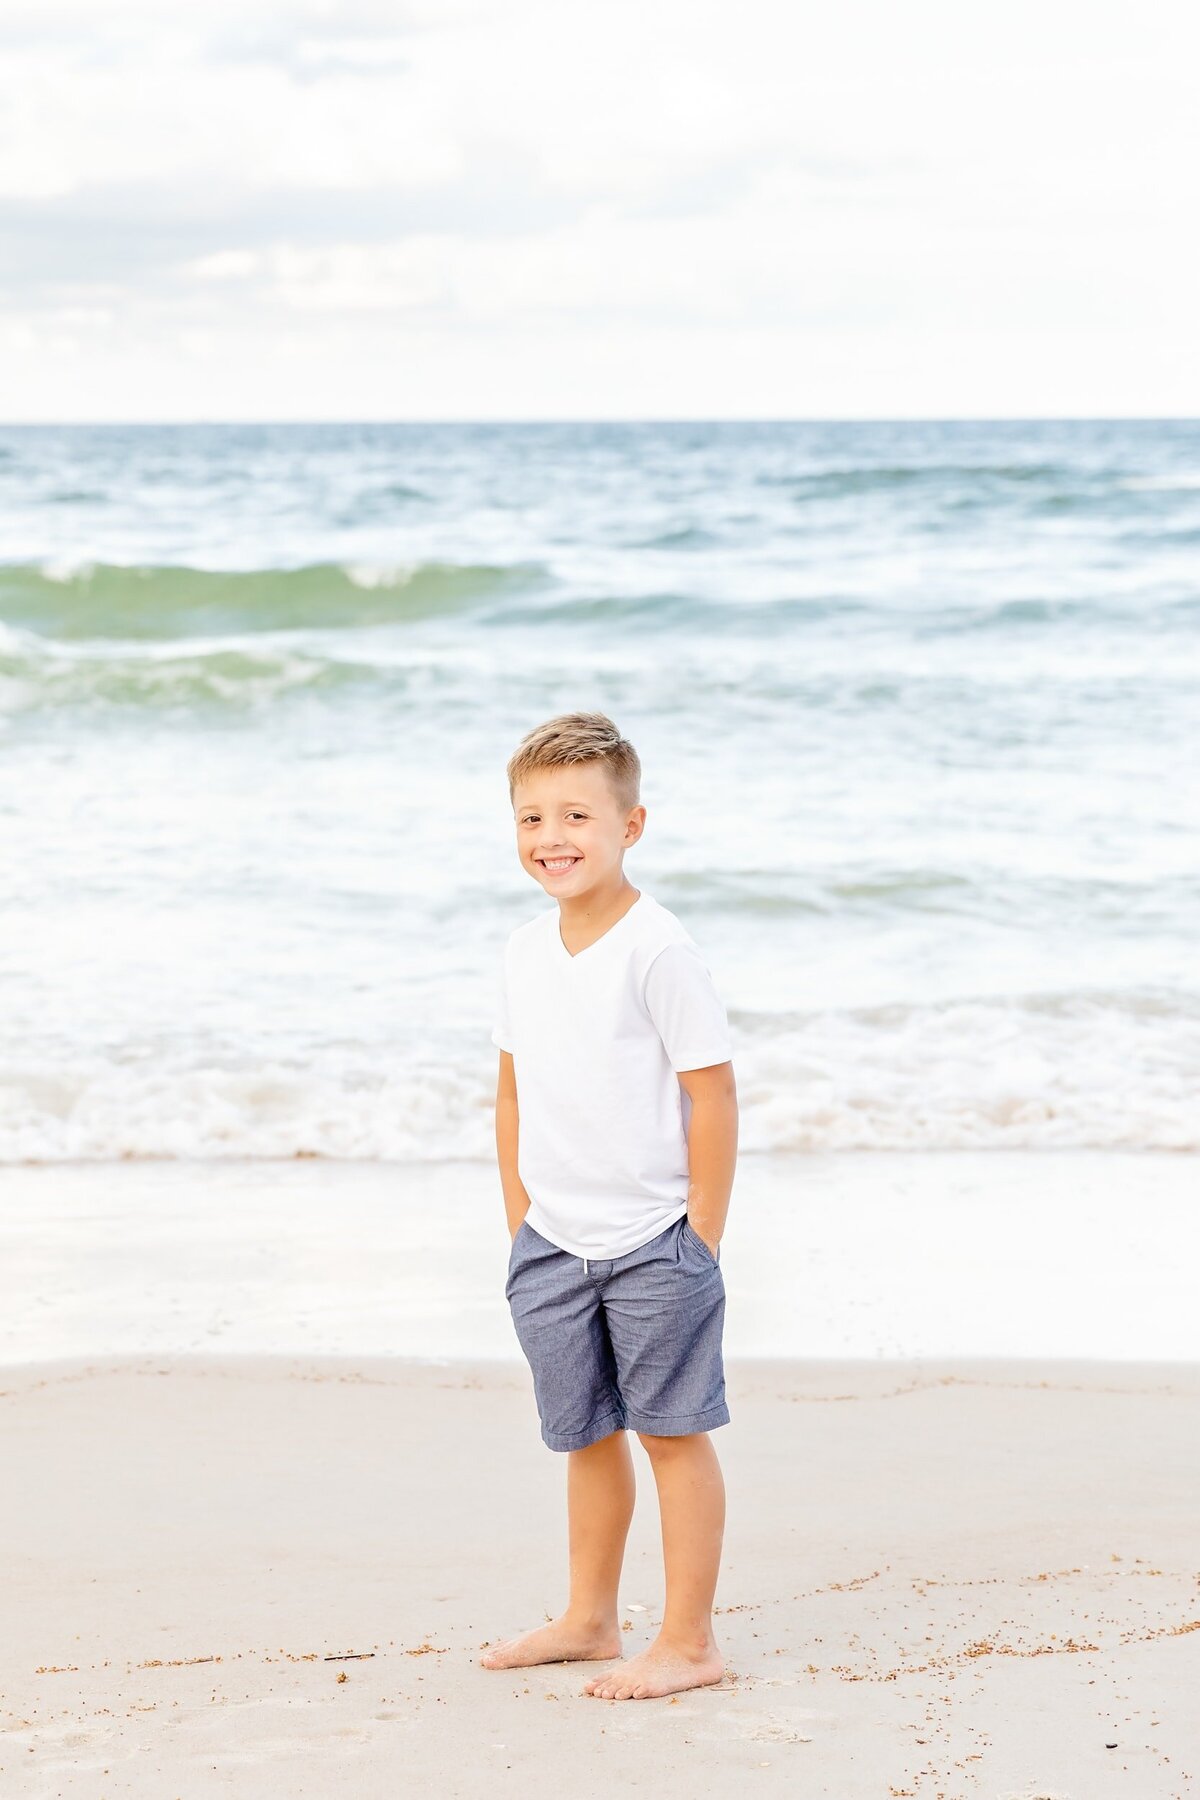 New Smyrna Beach extended family Photographer | Maggie Collins-47